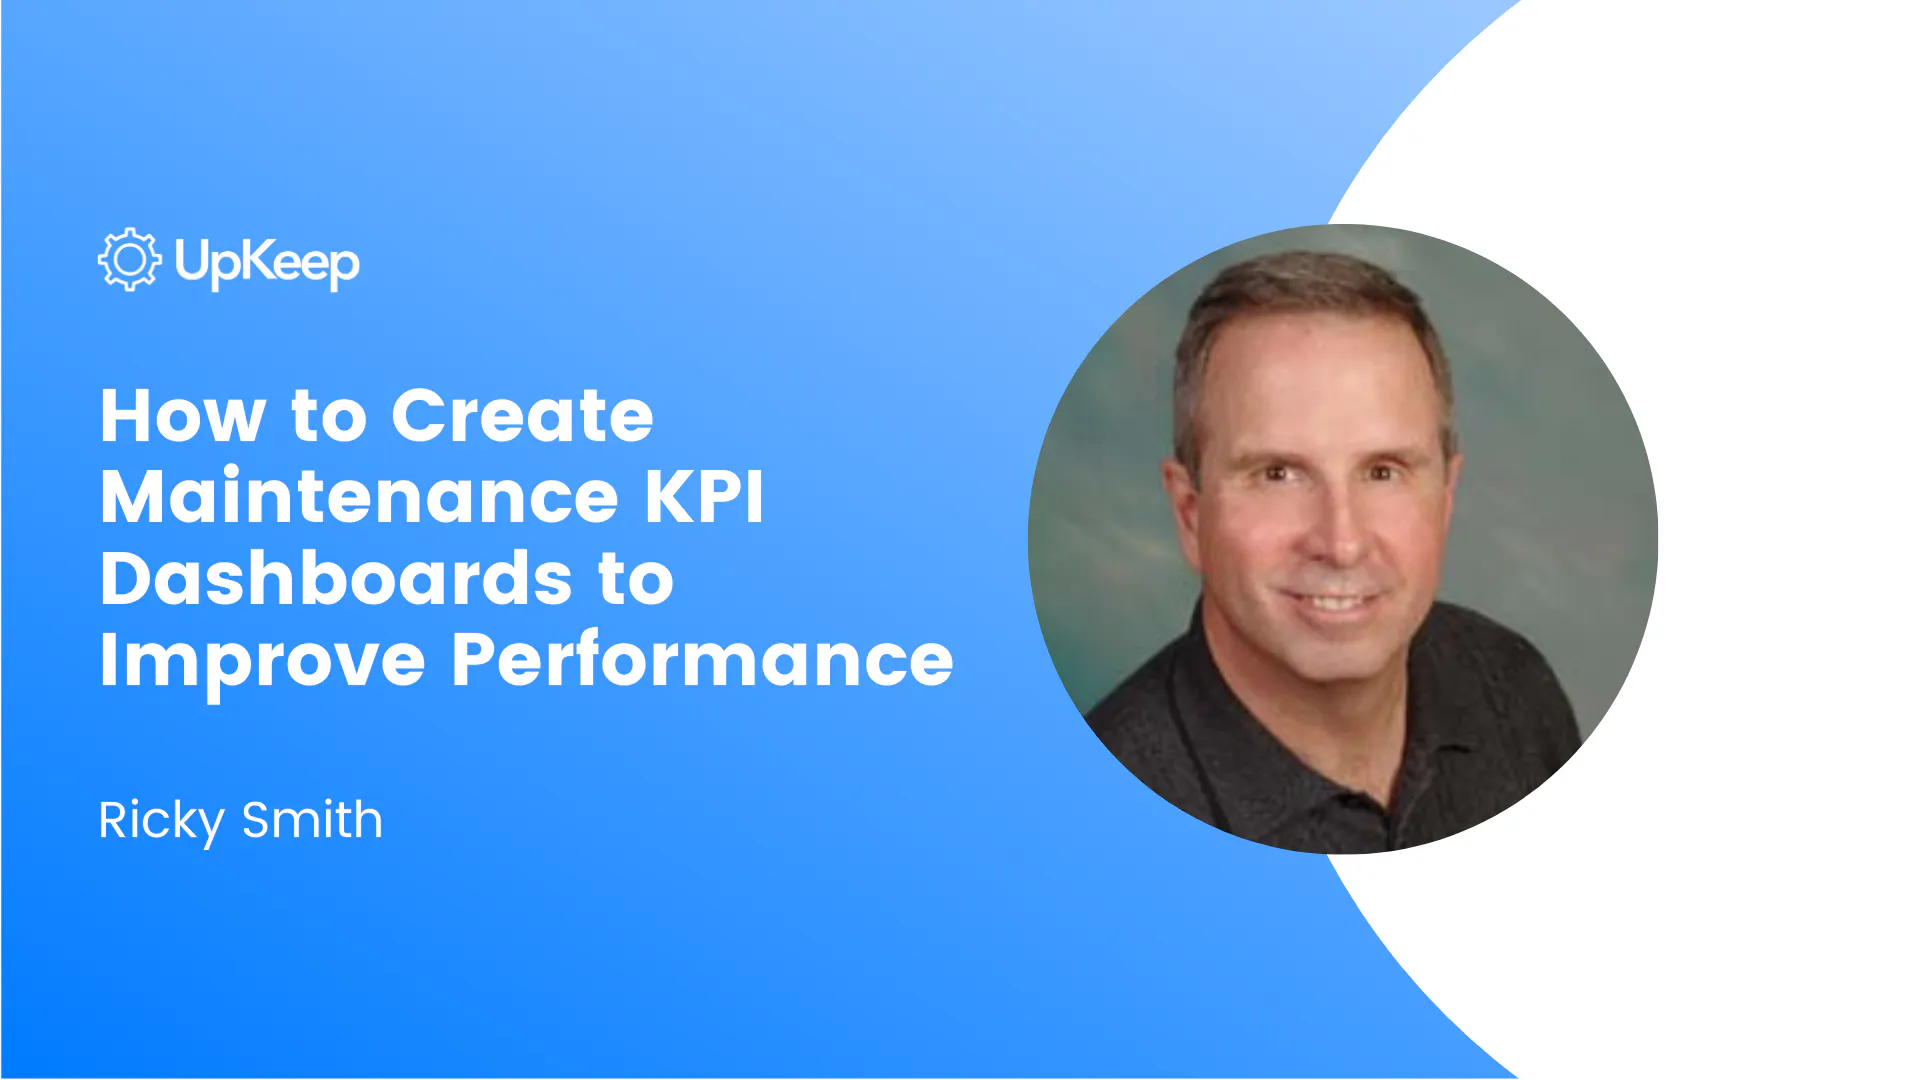 How to Create Maintenance KPI Dashboards to Improve Performance